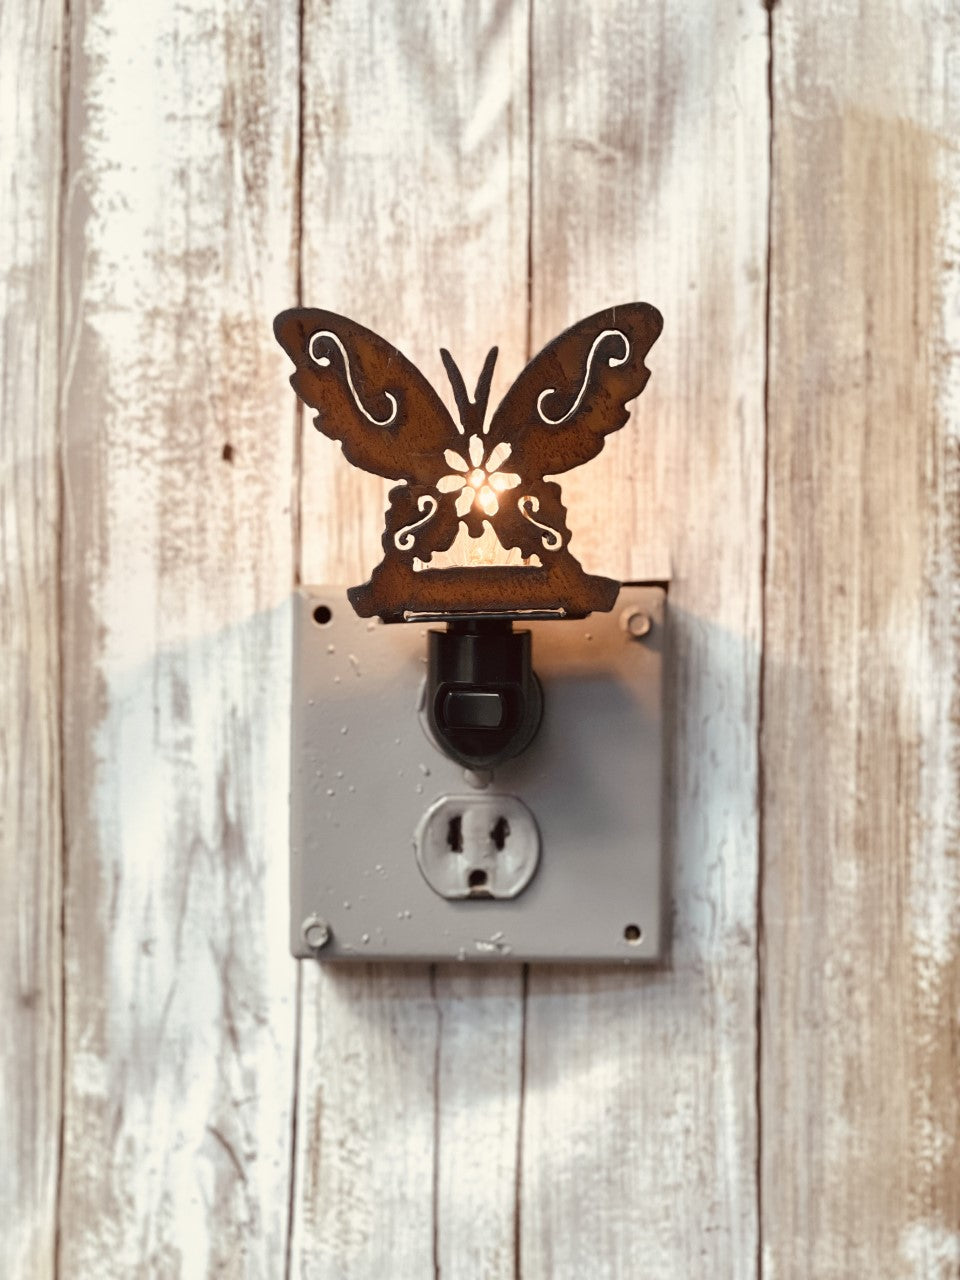 Butterfly GARDEN FRIEND Night Light Image by Universal Ironworks - gift